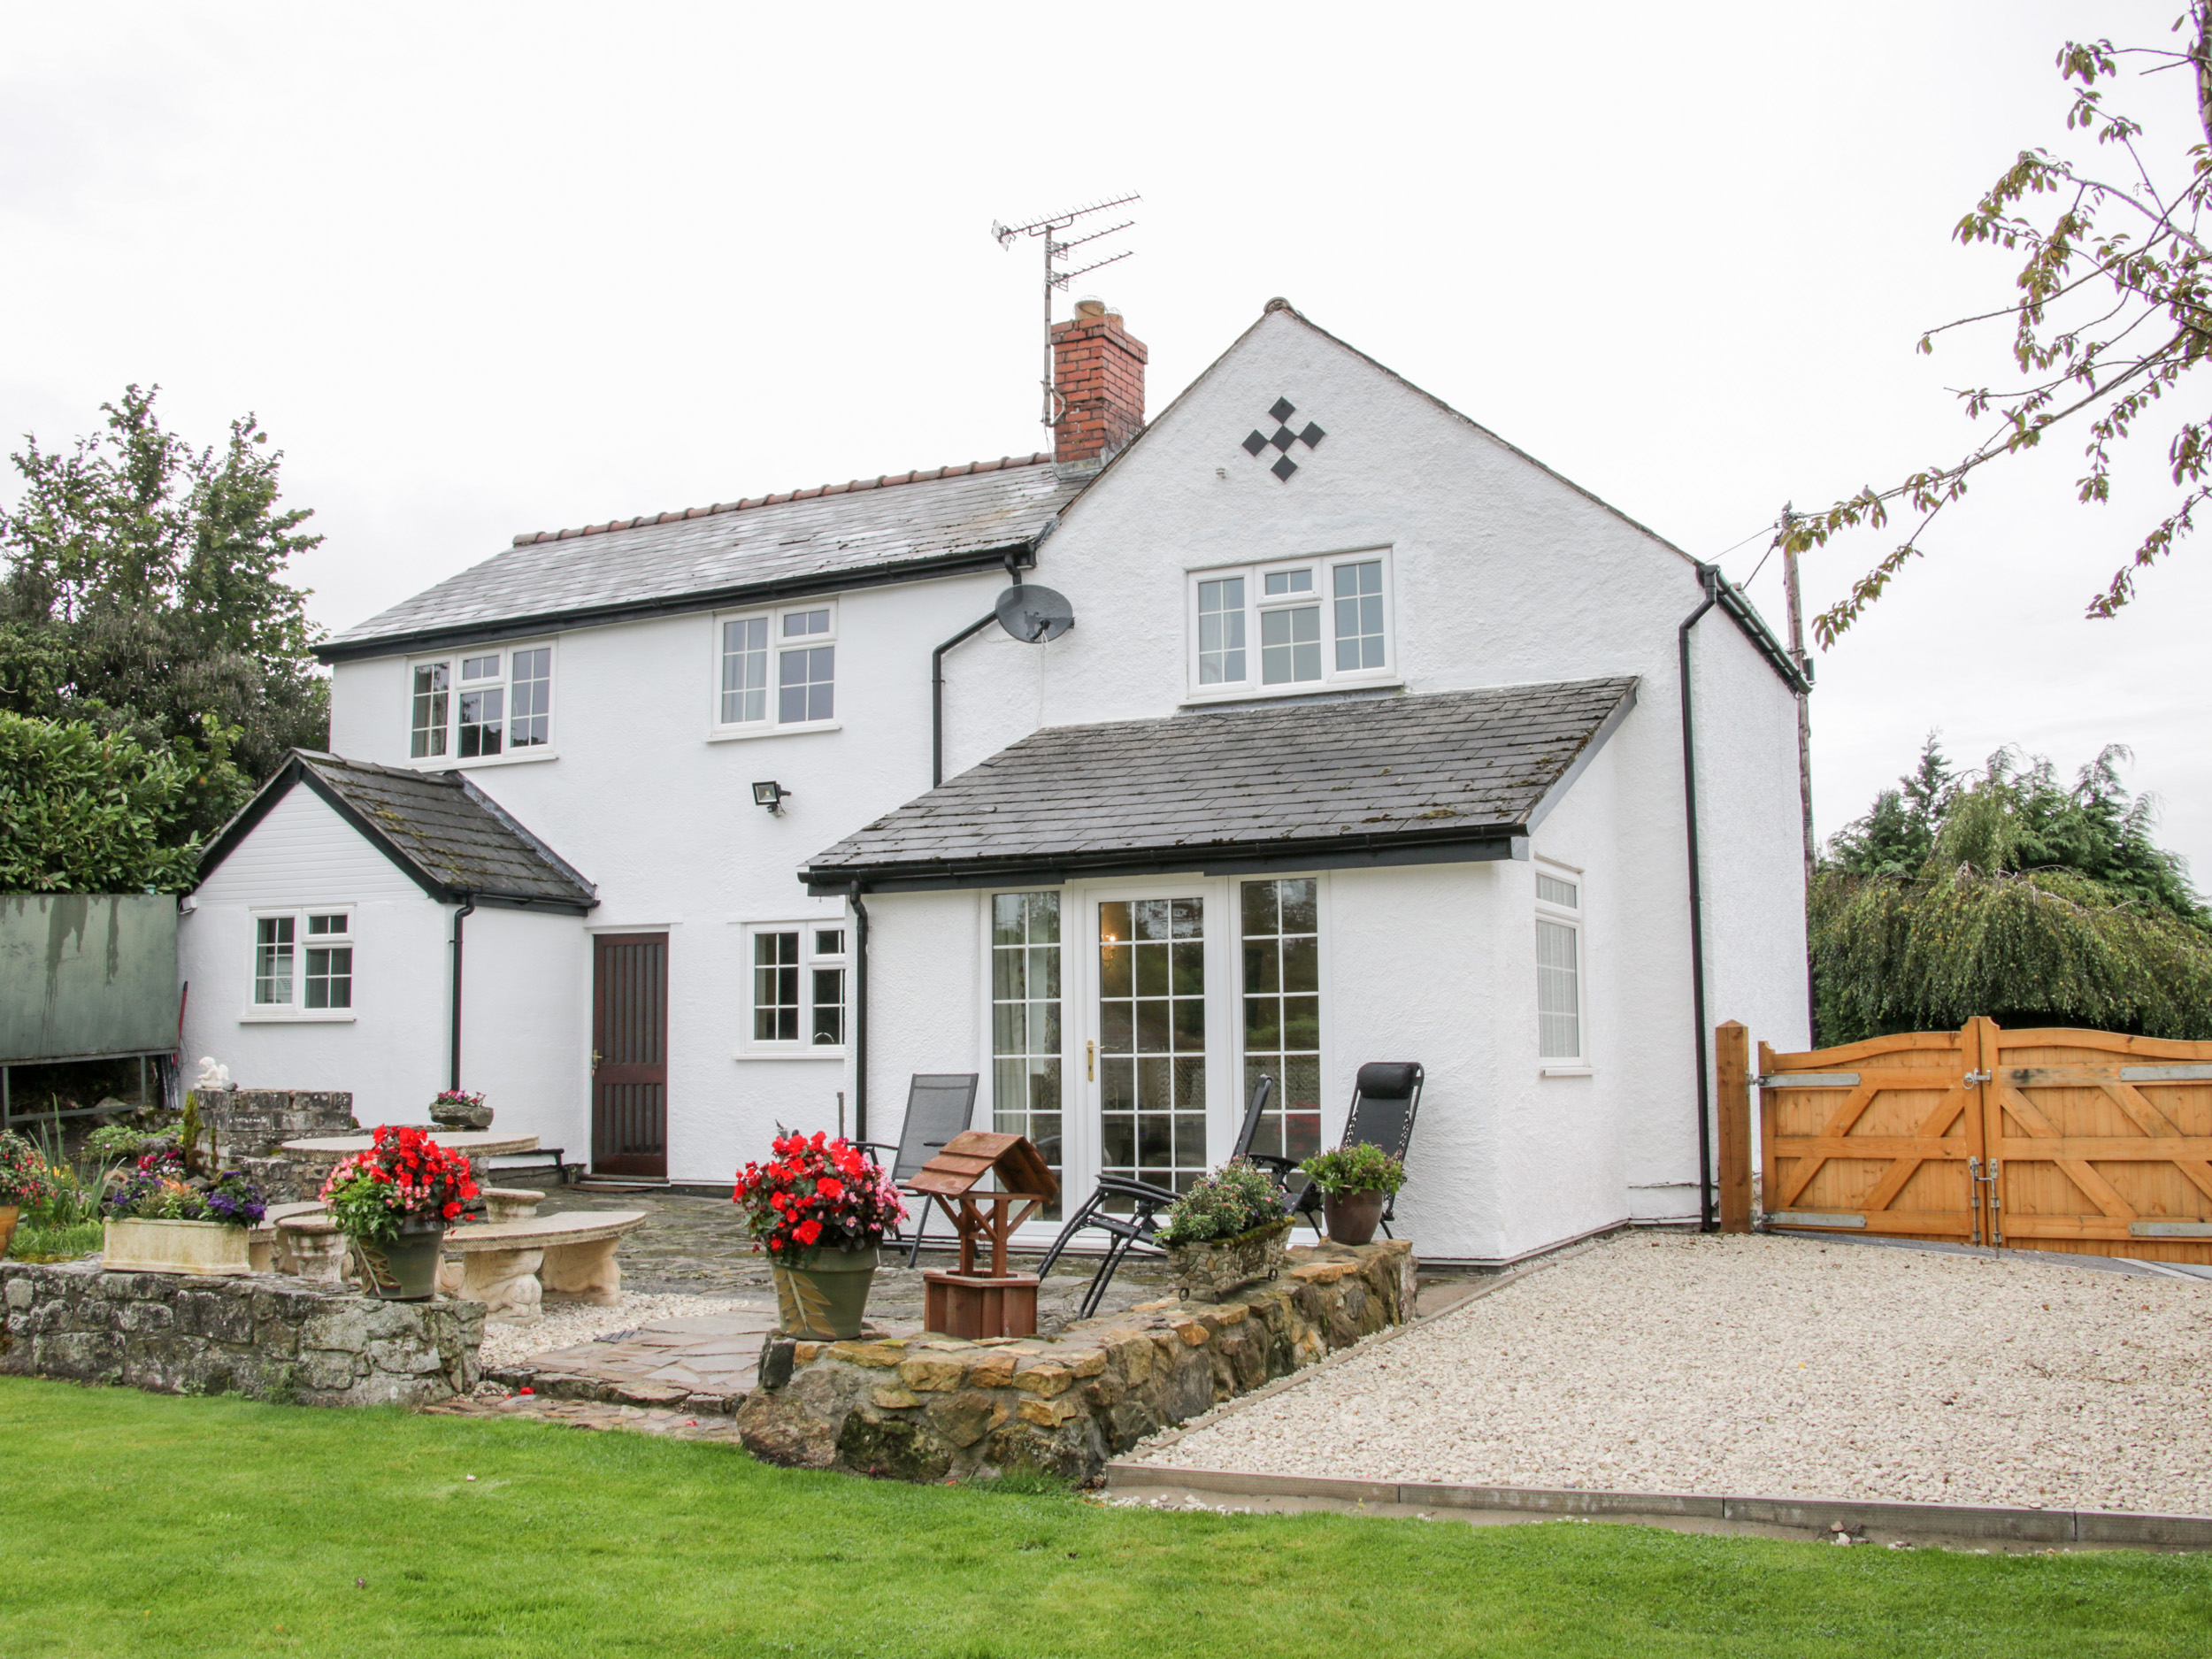 5 bedroom Cottage for rent in Oswestry